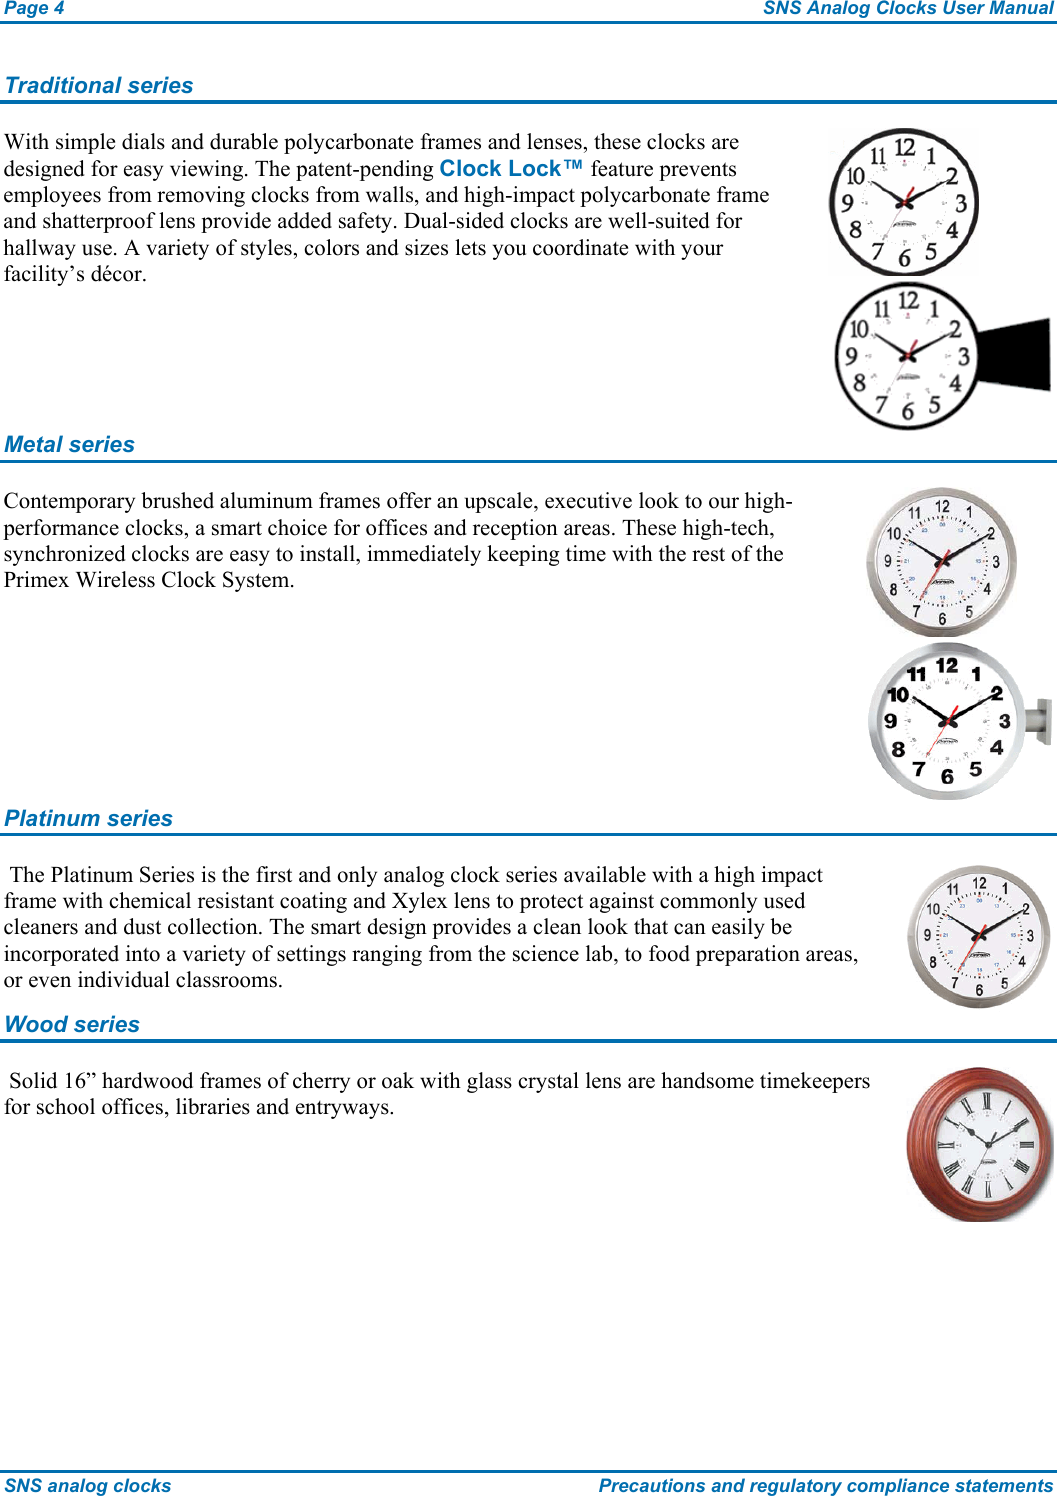 Page 4  SNS Analog Clocks User Manual SNS analog clocks  Precautions and regulatory compliance statements Traditional series With simple dials and durable polycarbonate frames and lenses, these clocks are designed for easy viewing. The patent-pending Clock Lock™ feature prevents employees from removing clocks from walls, and high-impact polycarbonate frame and shatterproof lens provide added safety. Dual-sided clocks are well-suited for hallway use. A variety of styles, colors and sizes lets you coordinate with your facility’s décor.  Metal series Contemporary brushed aluminum frames offer an upscale, executive look to our high-performance clocks, a smart choice for offices and reception areas. These high-tech, synchronized clocks are easy to install, immediately keeping time with the rest of the Primex Wireless Clock System.  Platinum series  The Platinum Series is the first and only analog clock series available with a high impact frame with chemical resistant coating and Xylex lens to protect against commonly used cleaners and dust collection. The smart design provides a clean look that can easily be incorporated into a variety of settings ranging from the science lab, to food preparation areas, or even individual classrooms.  Wood series  Solid 16” hardwood frames of cherry or oak with glass crystal lens are handsome timekeepers for school offices, libraries and entryways.  